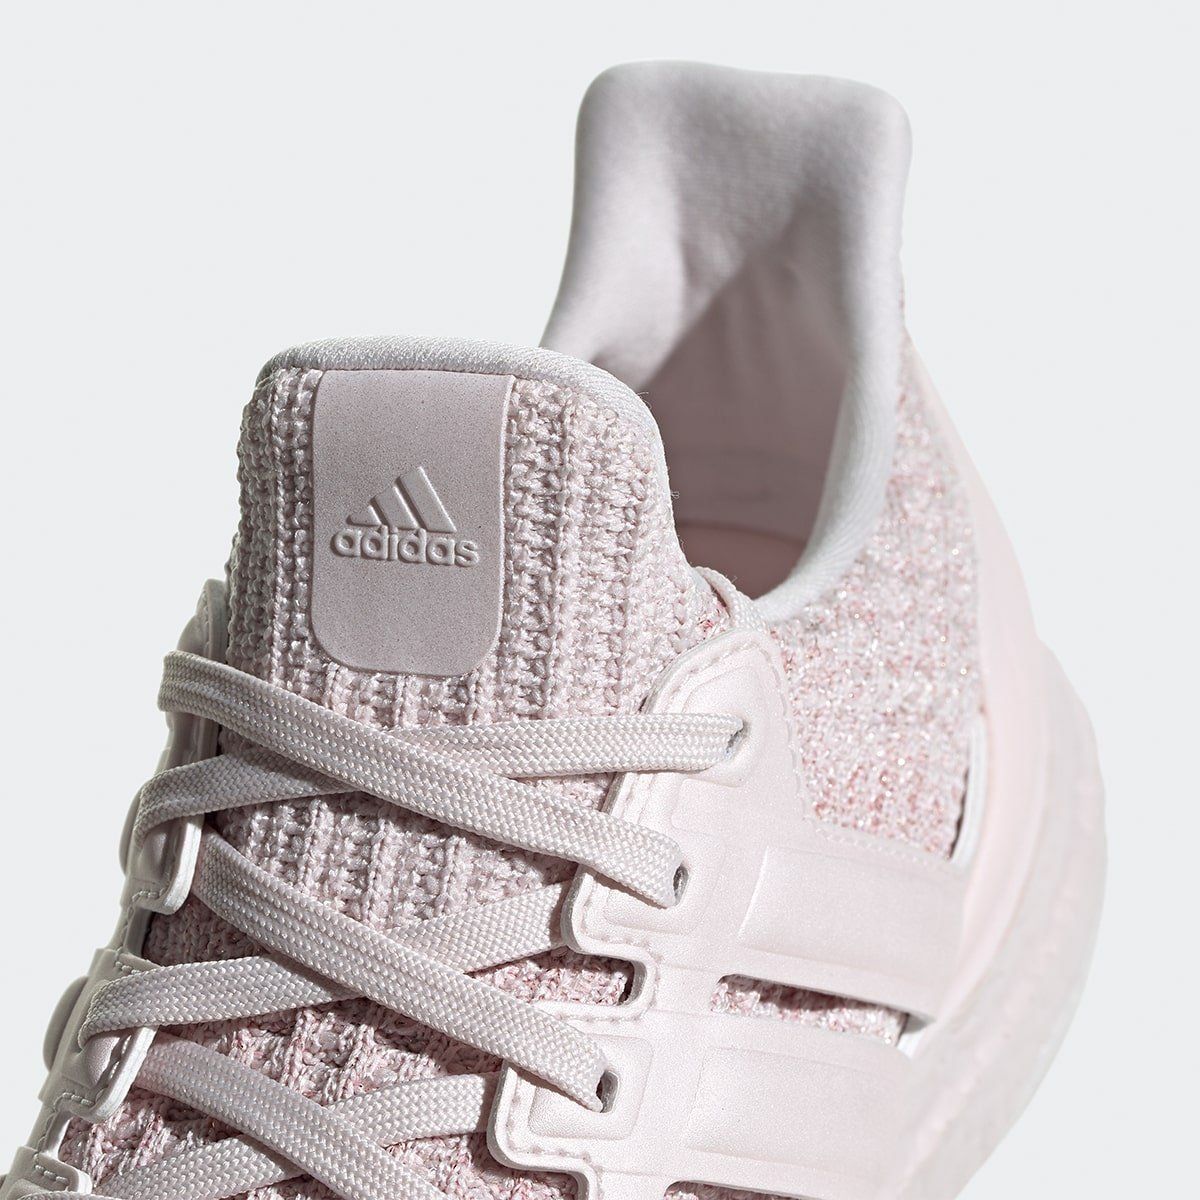 womens ultra boost orchid tint